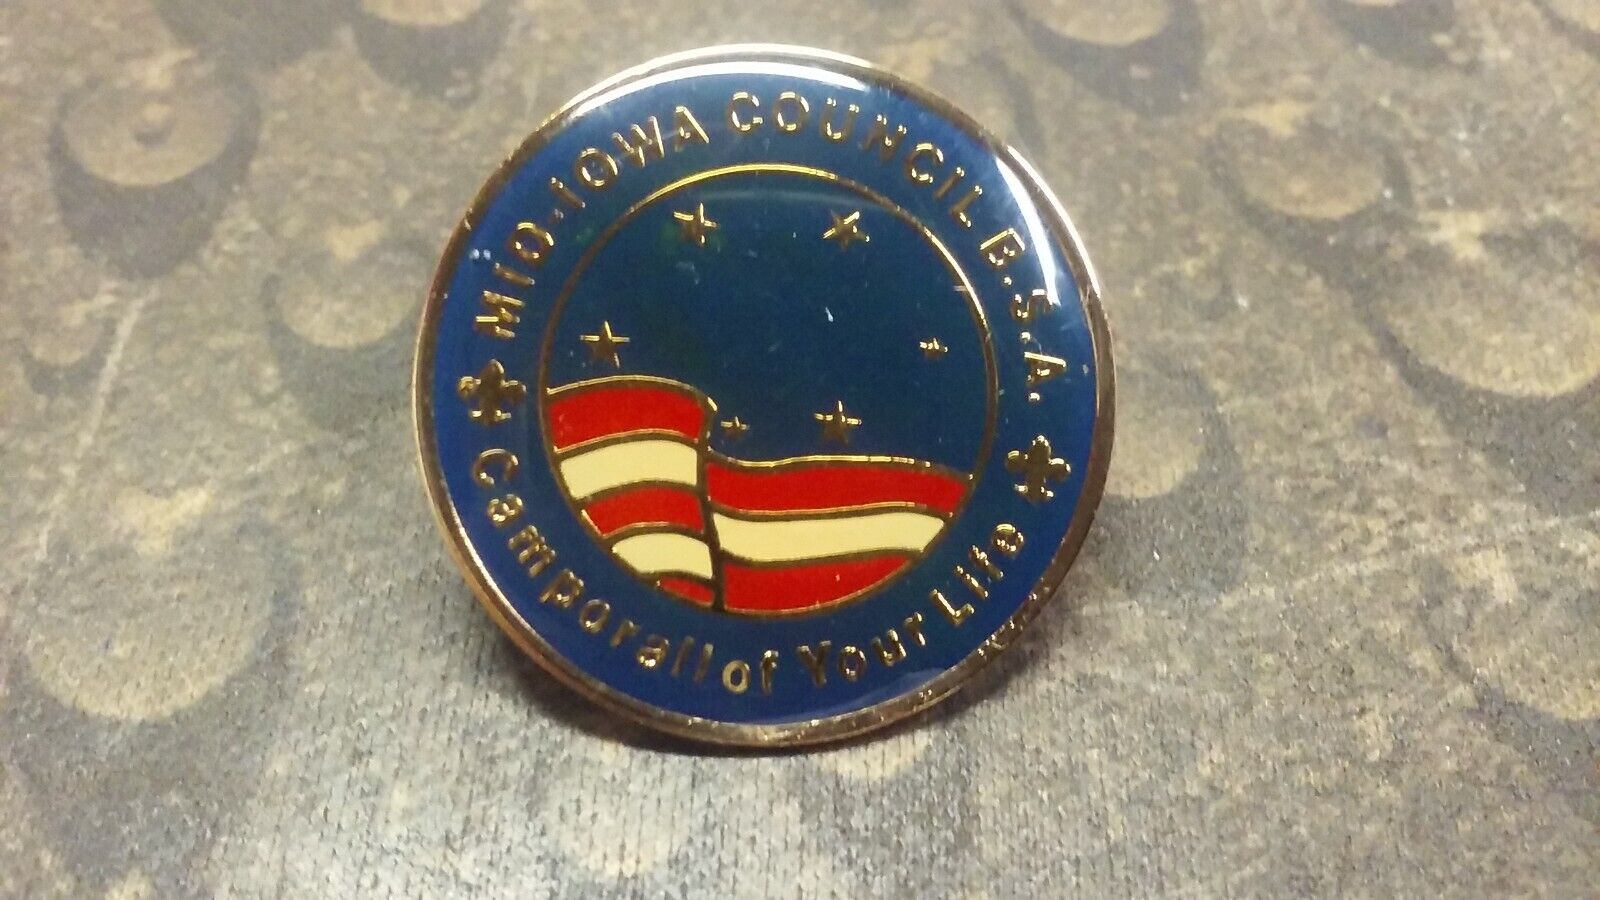 Mid Iowa Council BSA pin badge Boy Scouts Camporall of Your Life